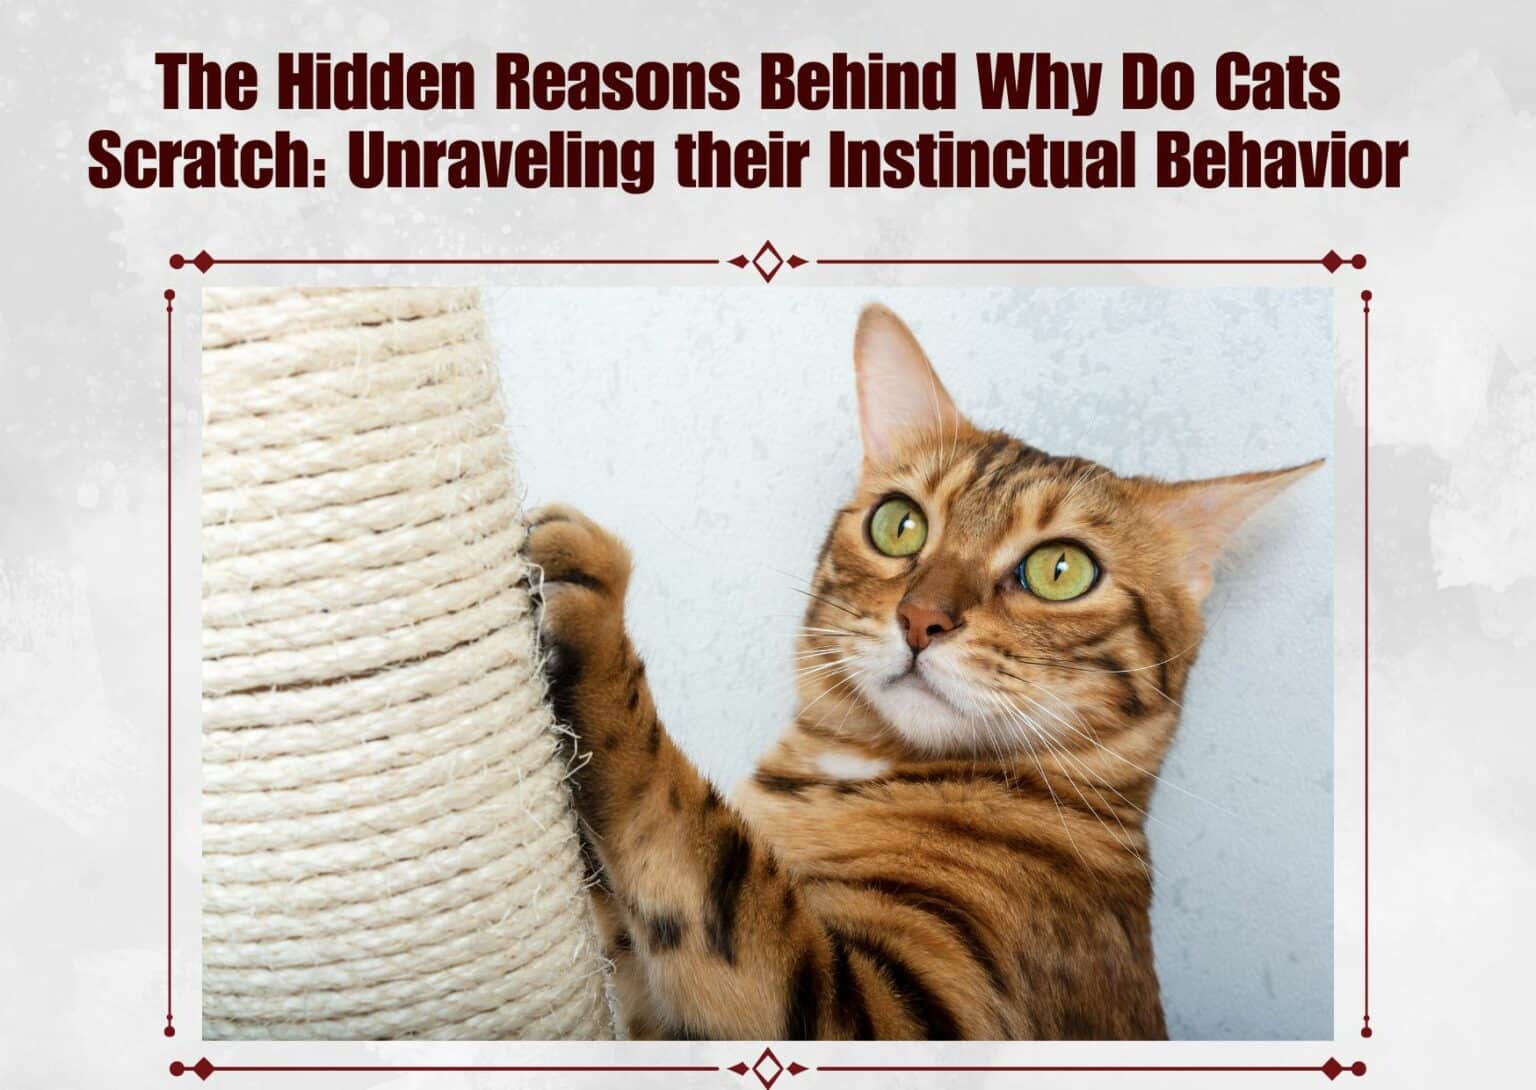 The Hidden Reasons Behind Why Do Cats Scratch Unraveling their Instinctual Behavior